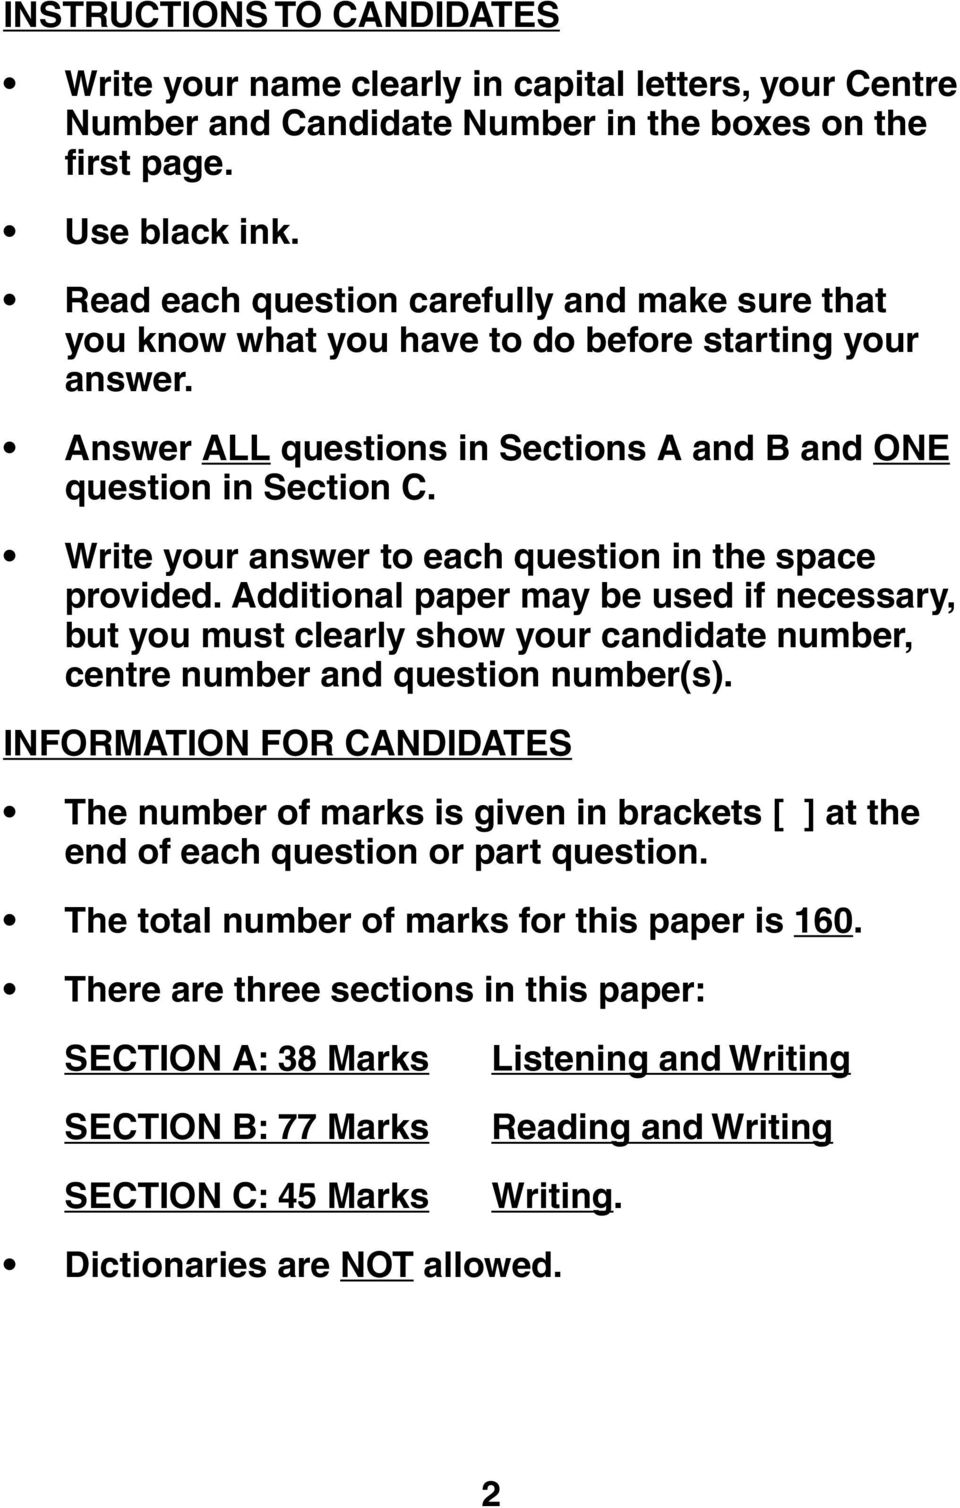 Write your answer to each question in the space provided. Additional paper may be used if necessary, but you must clearly show your candidate number, centre number and question number(s).